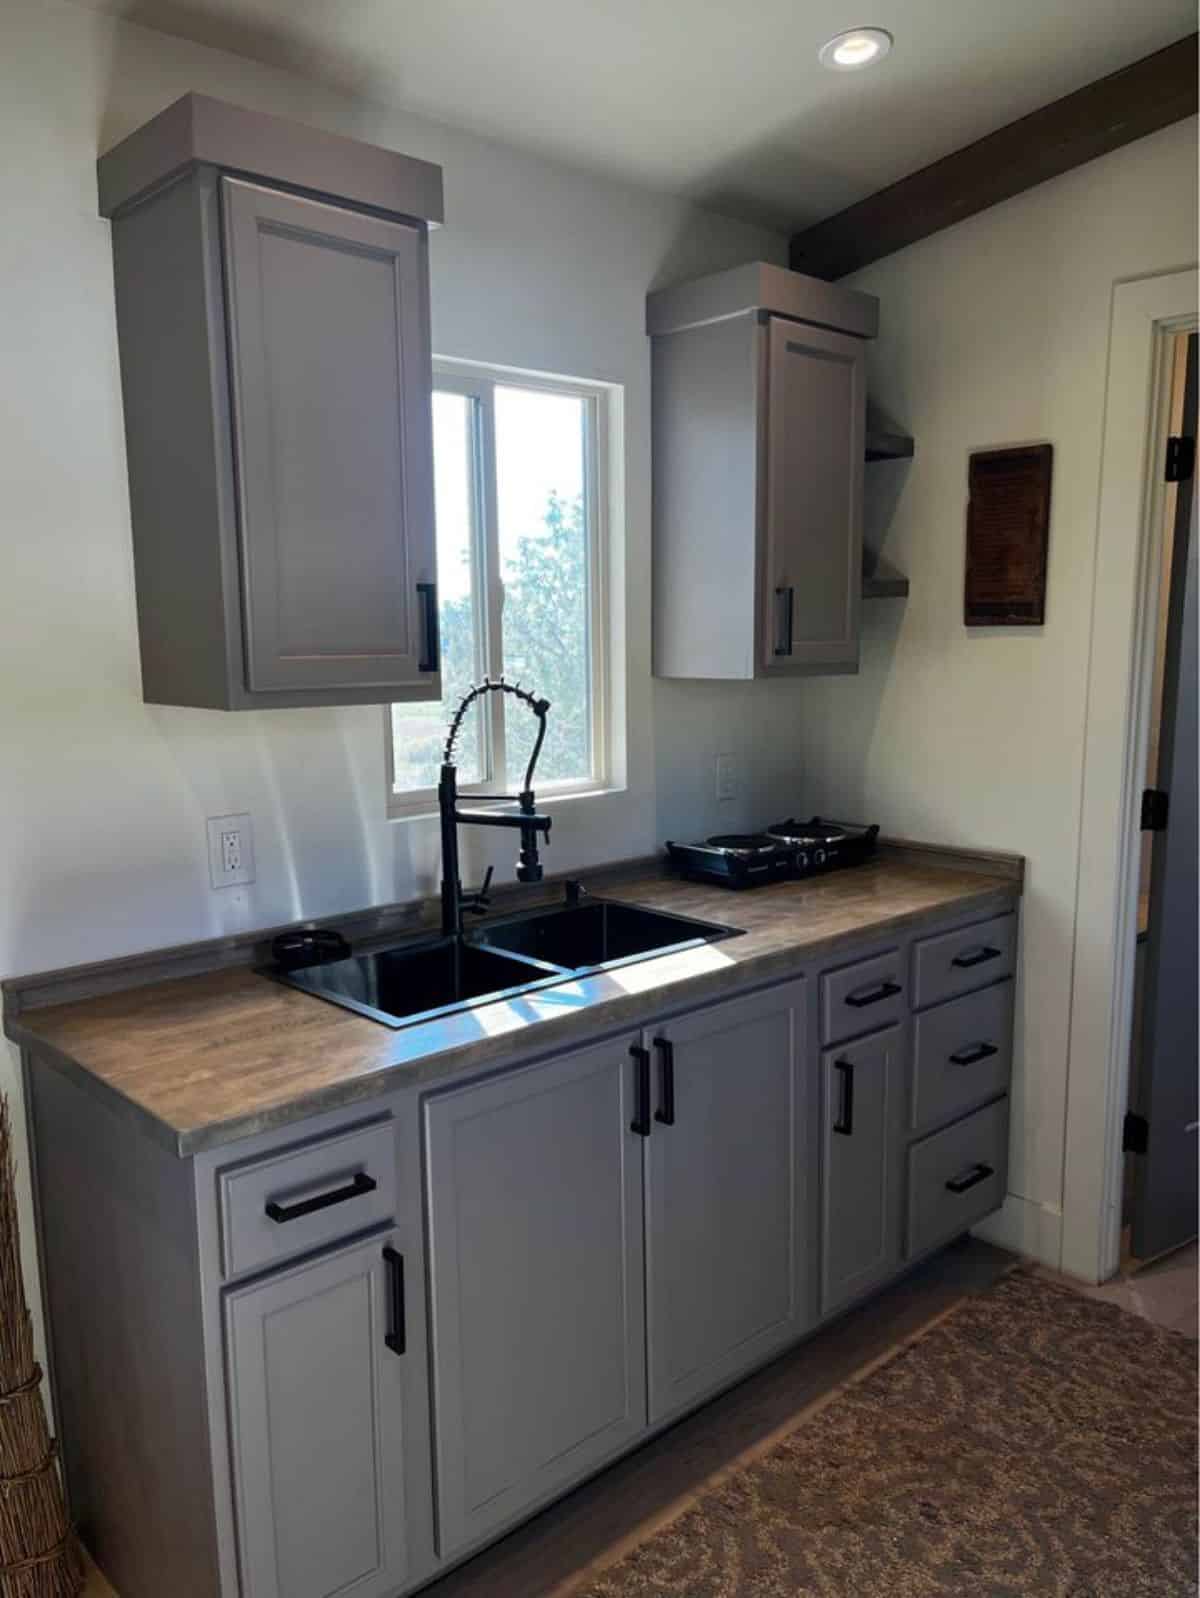 Kitchen area of exquisite tiny home